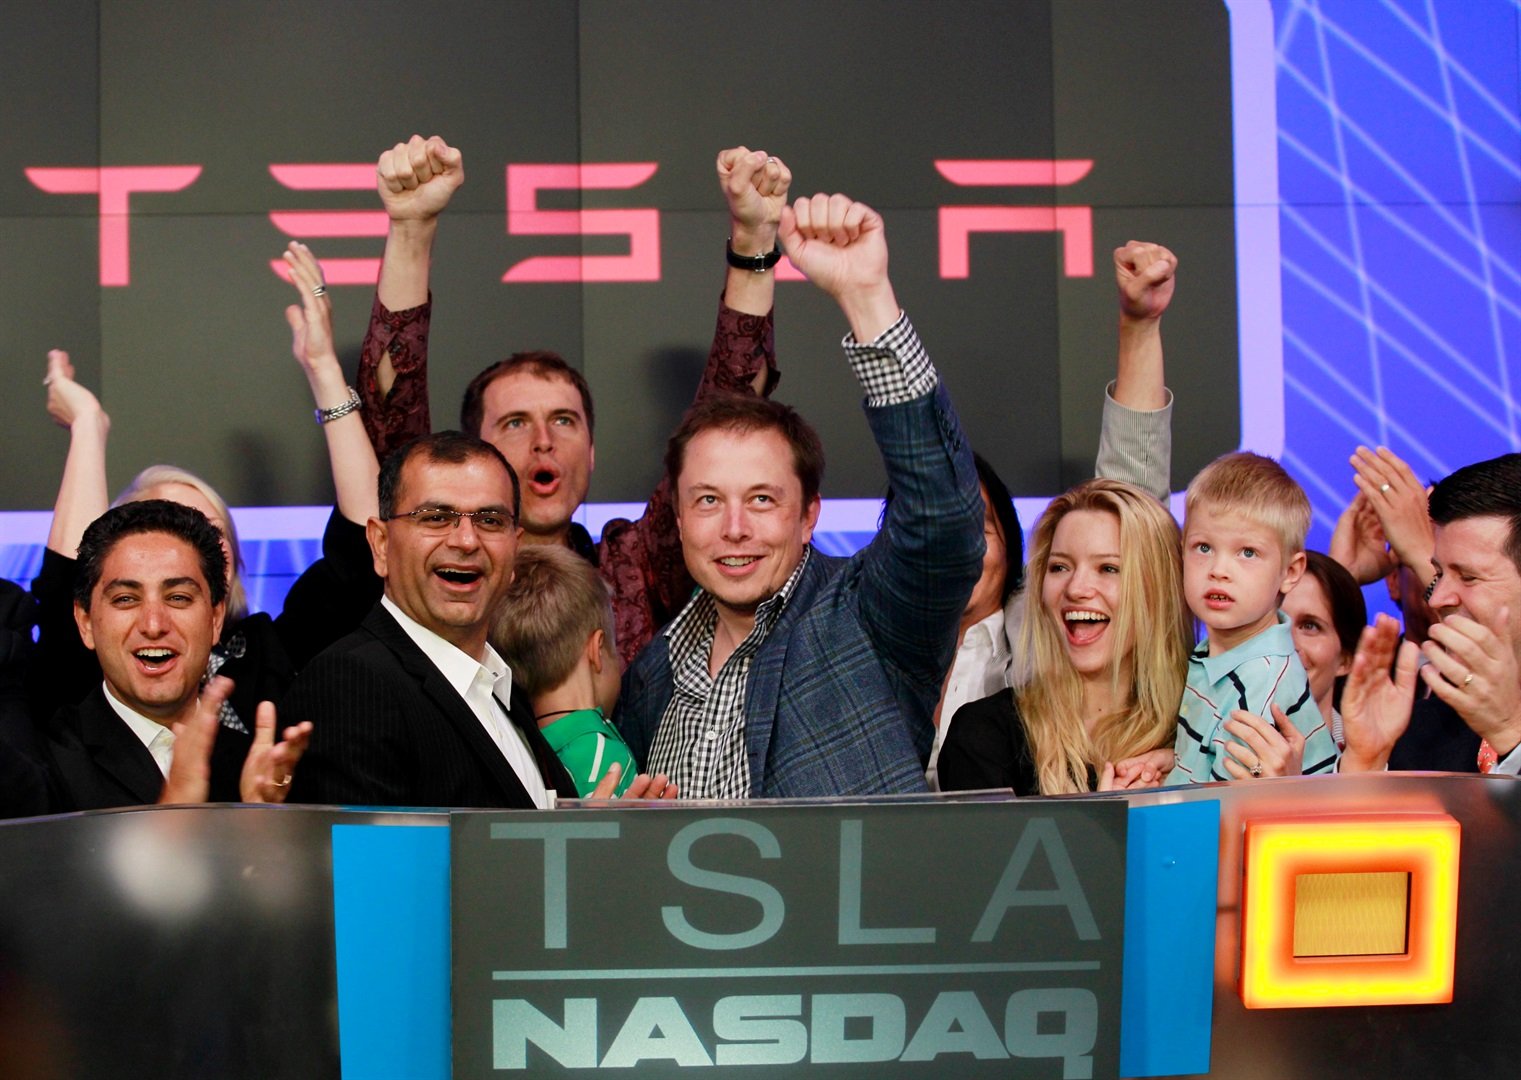 CEO of Tesla Motors Elon Musk waves after ringing the opening bell at the NASDAQ market in celebration of his company's initial public offering in New York June 29, 2010.
